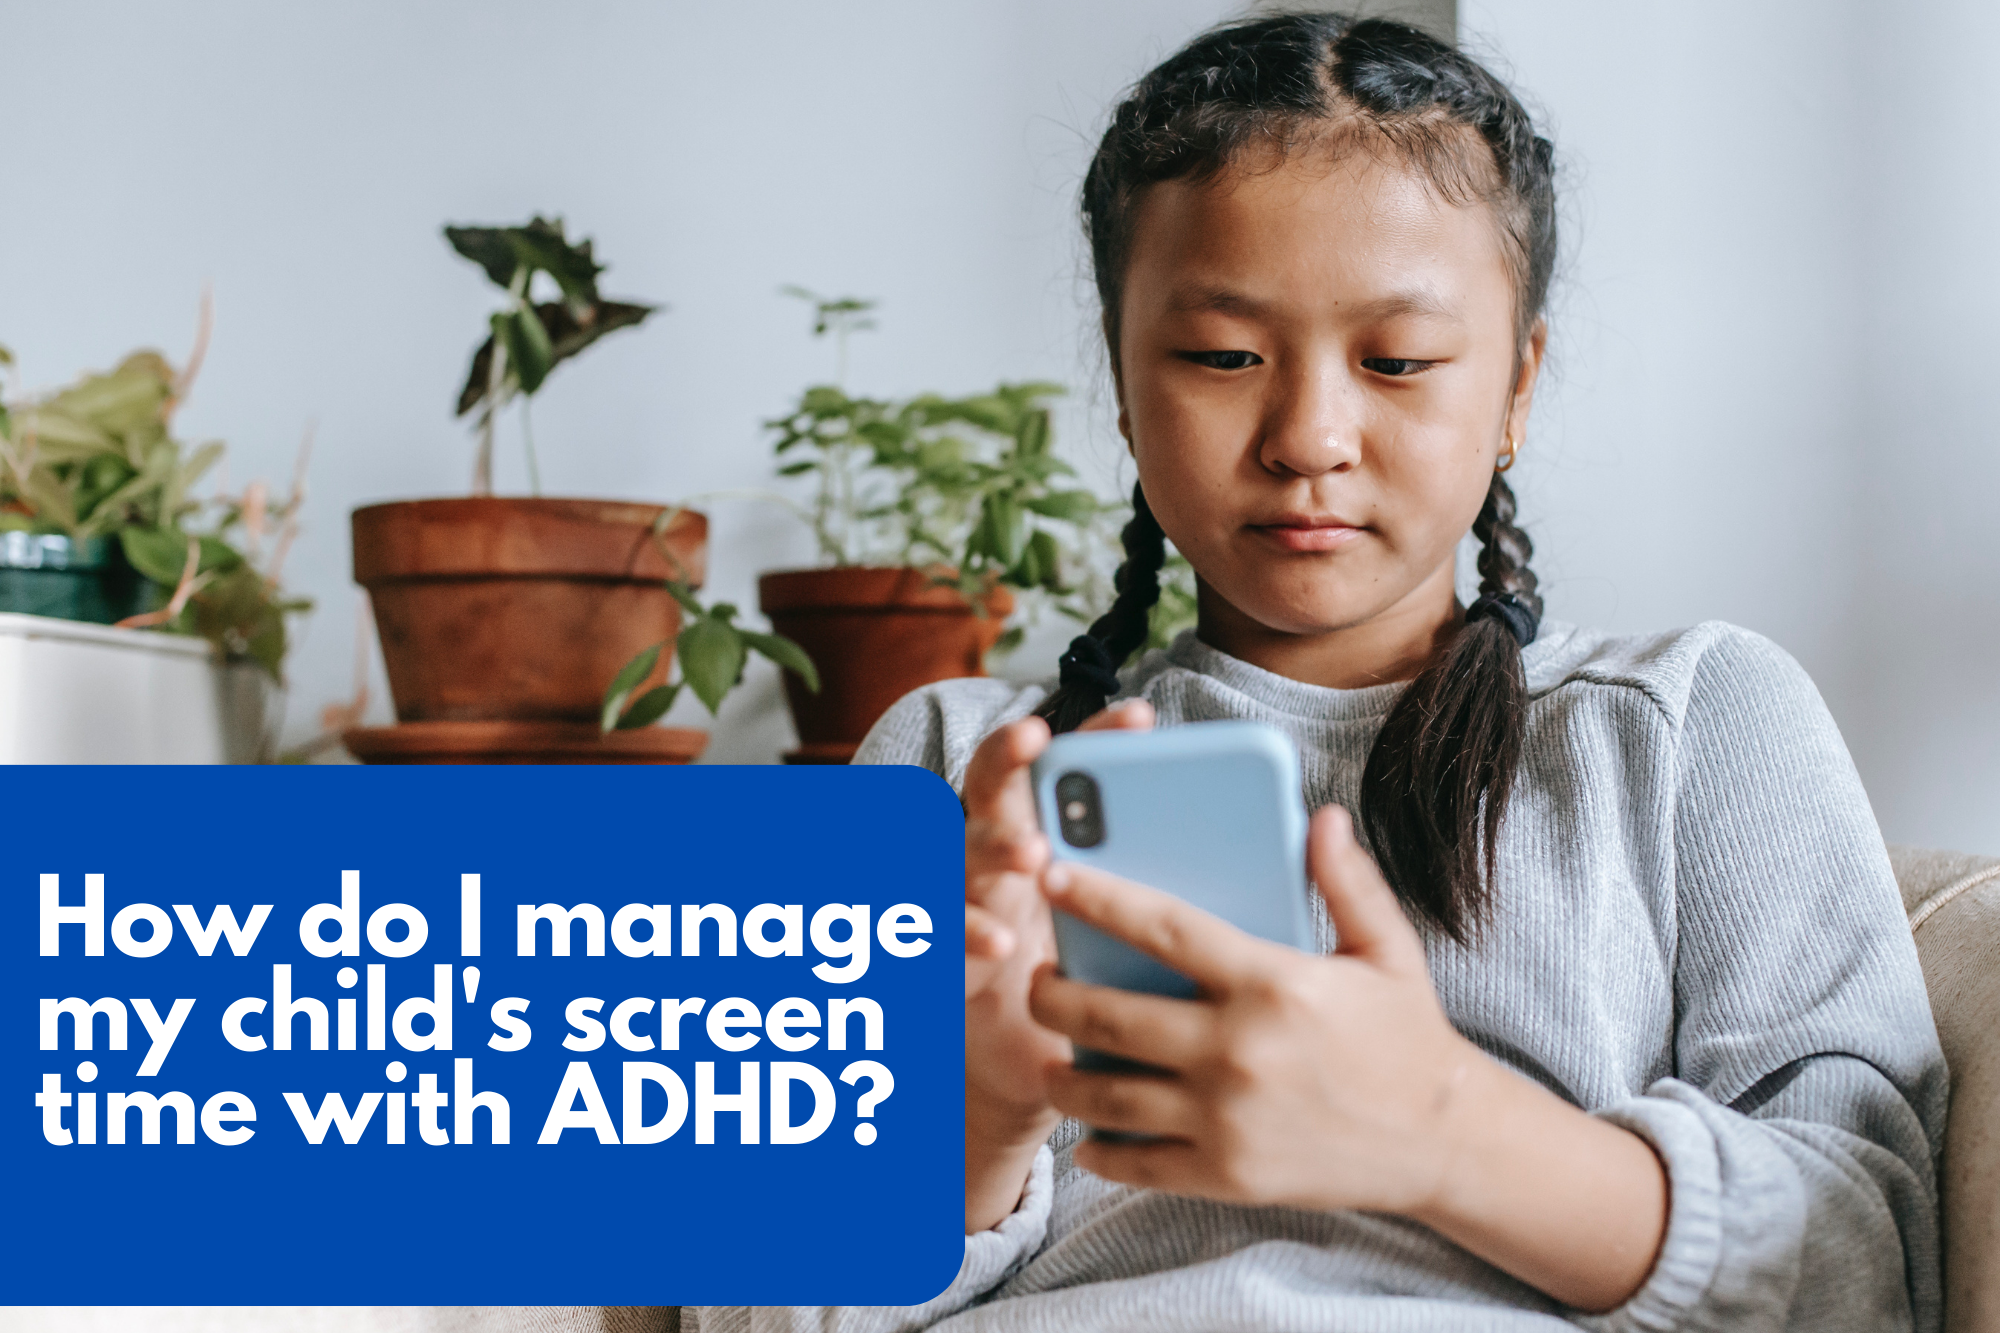 How do I manage my child's screen time with ADHD?